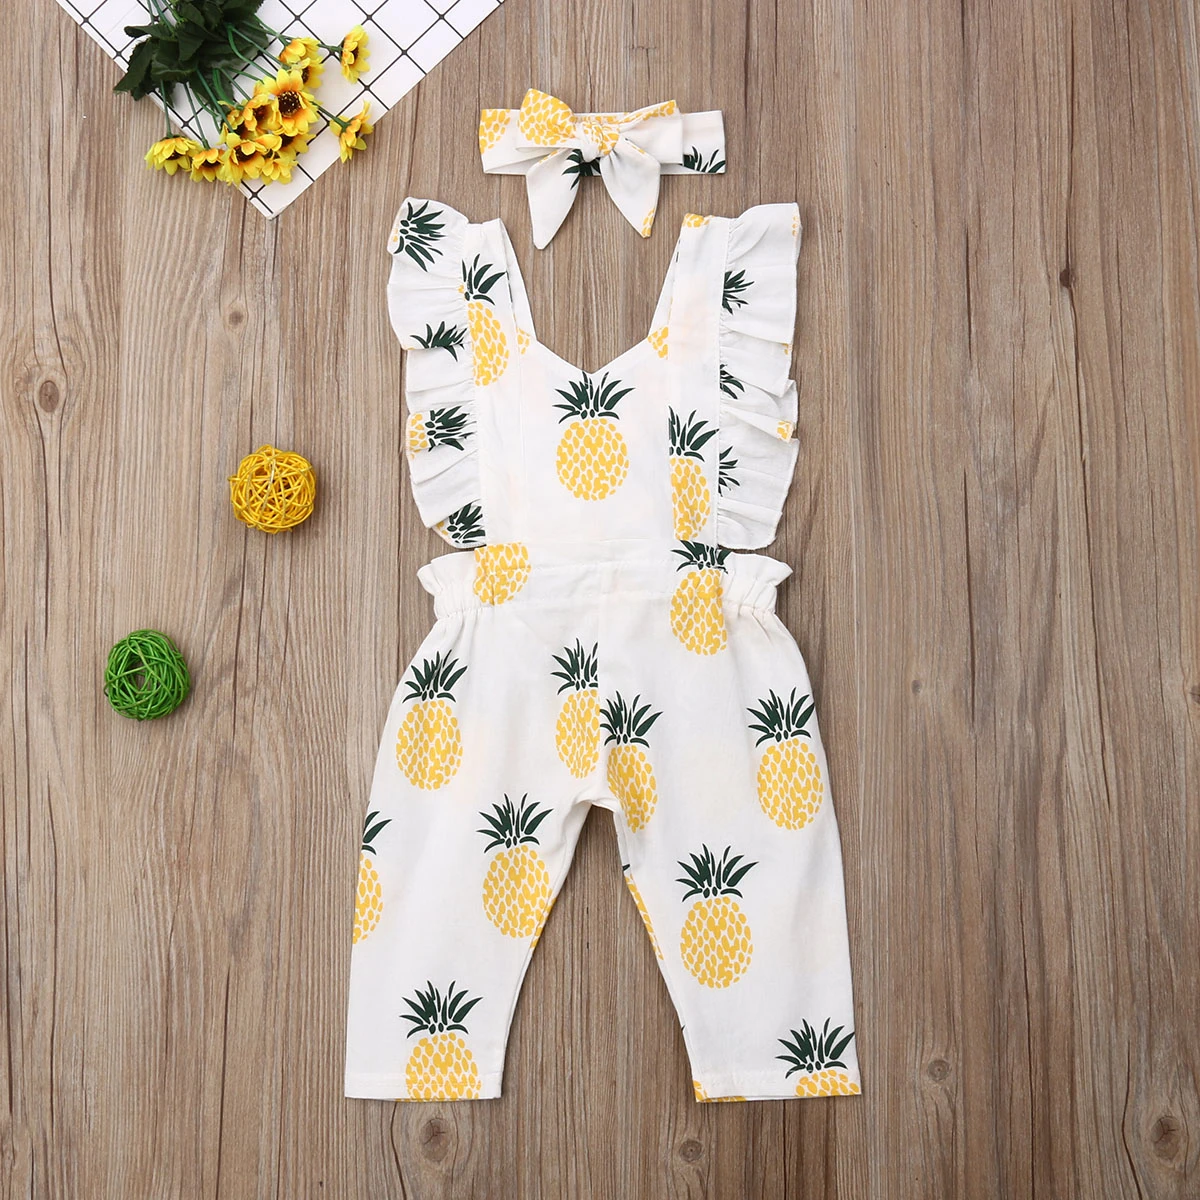 New Baby Girls Clothes Newborn Jumpsuits Toddler Sleeveless Ruffle Pineapple Printed Romper Headband Infant Outfits Clothing Baby Clothing Set for girl